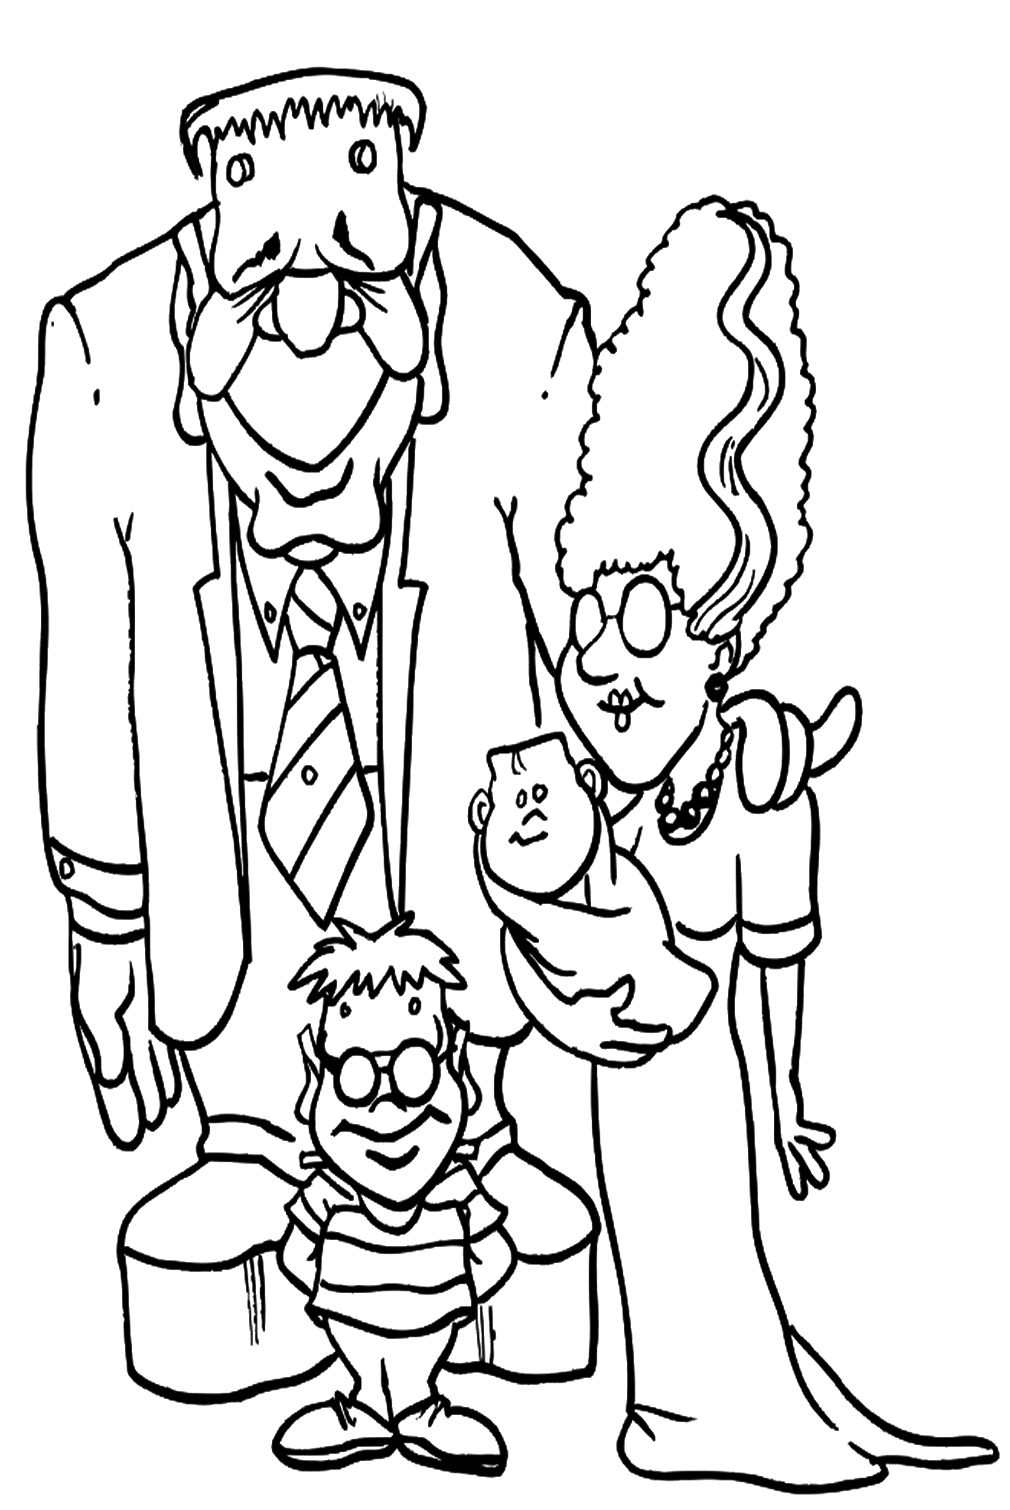 Frankenstein Family Coloring Page from Frankenstein